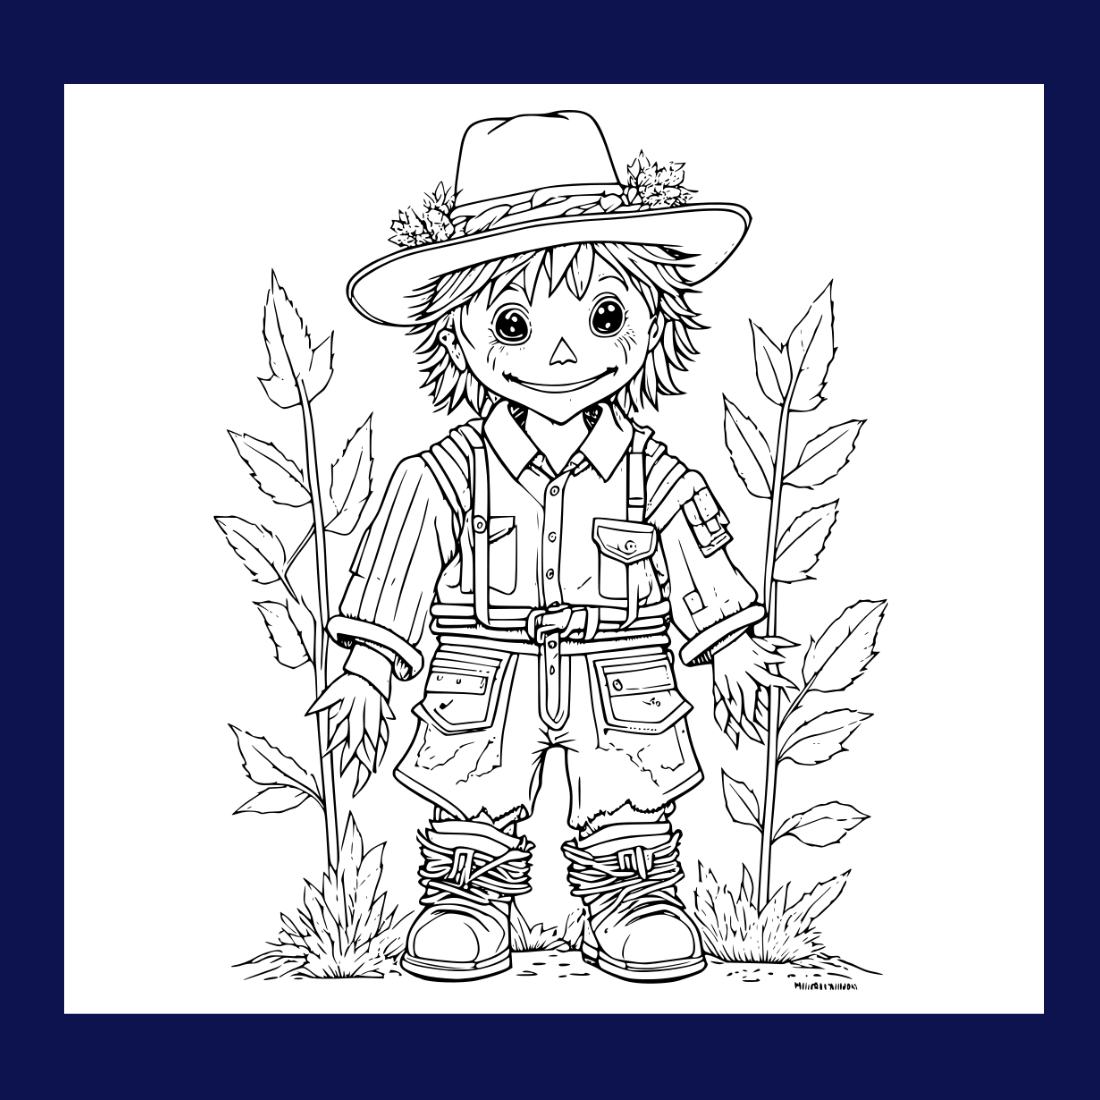 Coloring pages bundle for adultsa illustration of cute scarecrow character horror and creepy